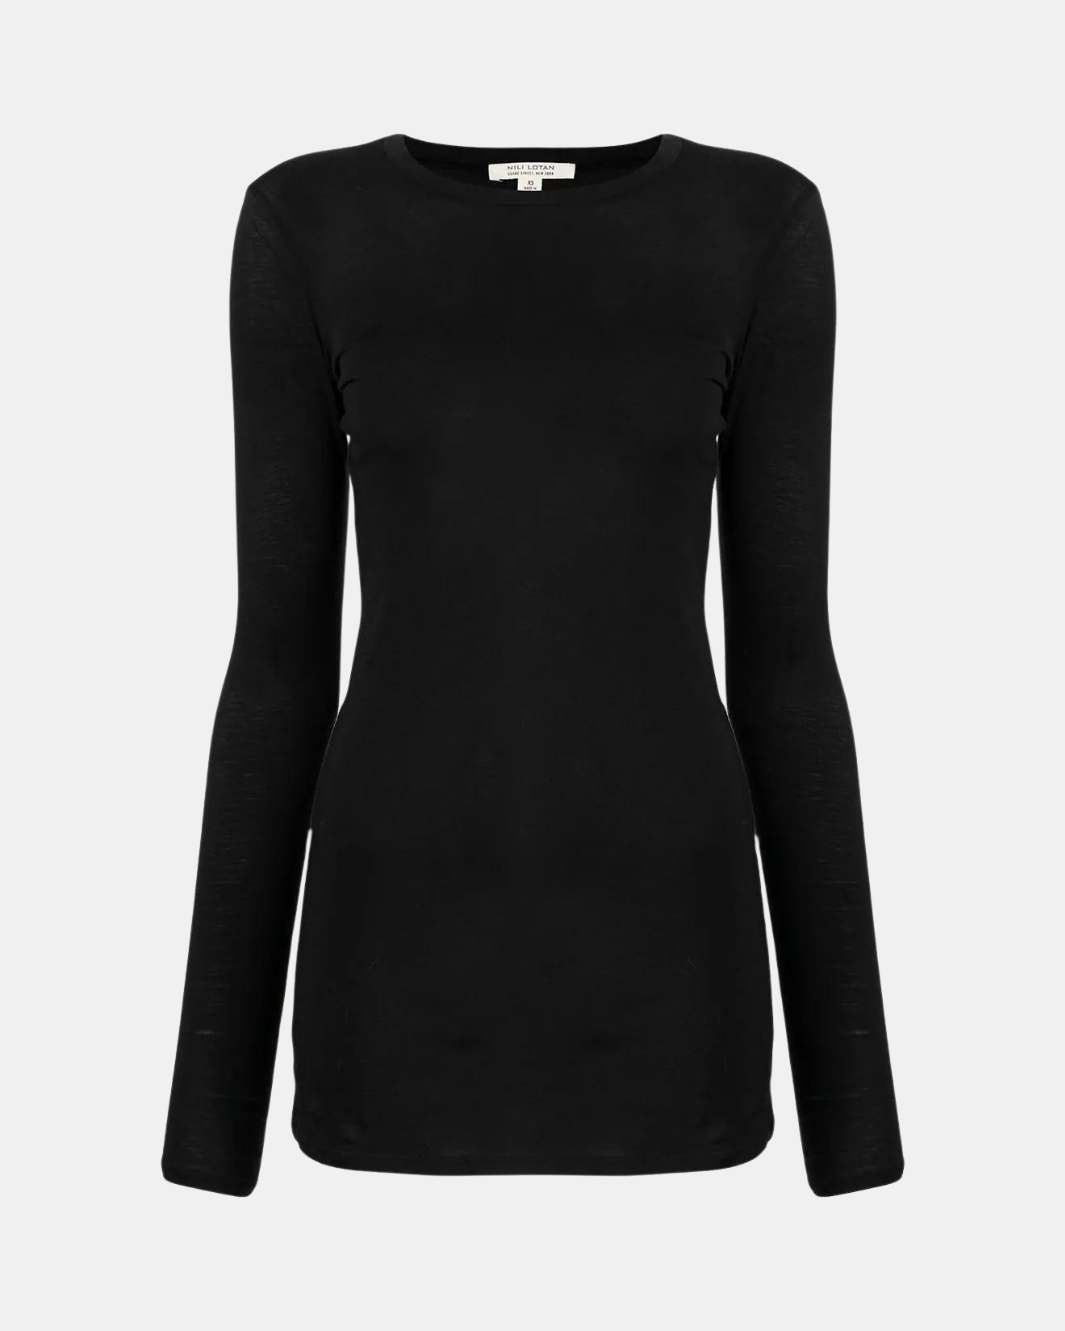 FITTED LONG SLEEVE T-SHIRT IN BLACK - Romi Boutique